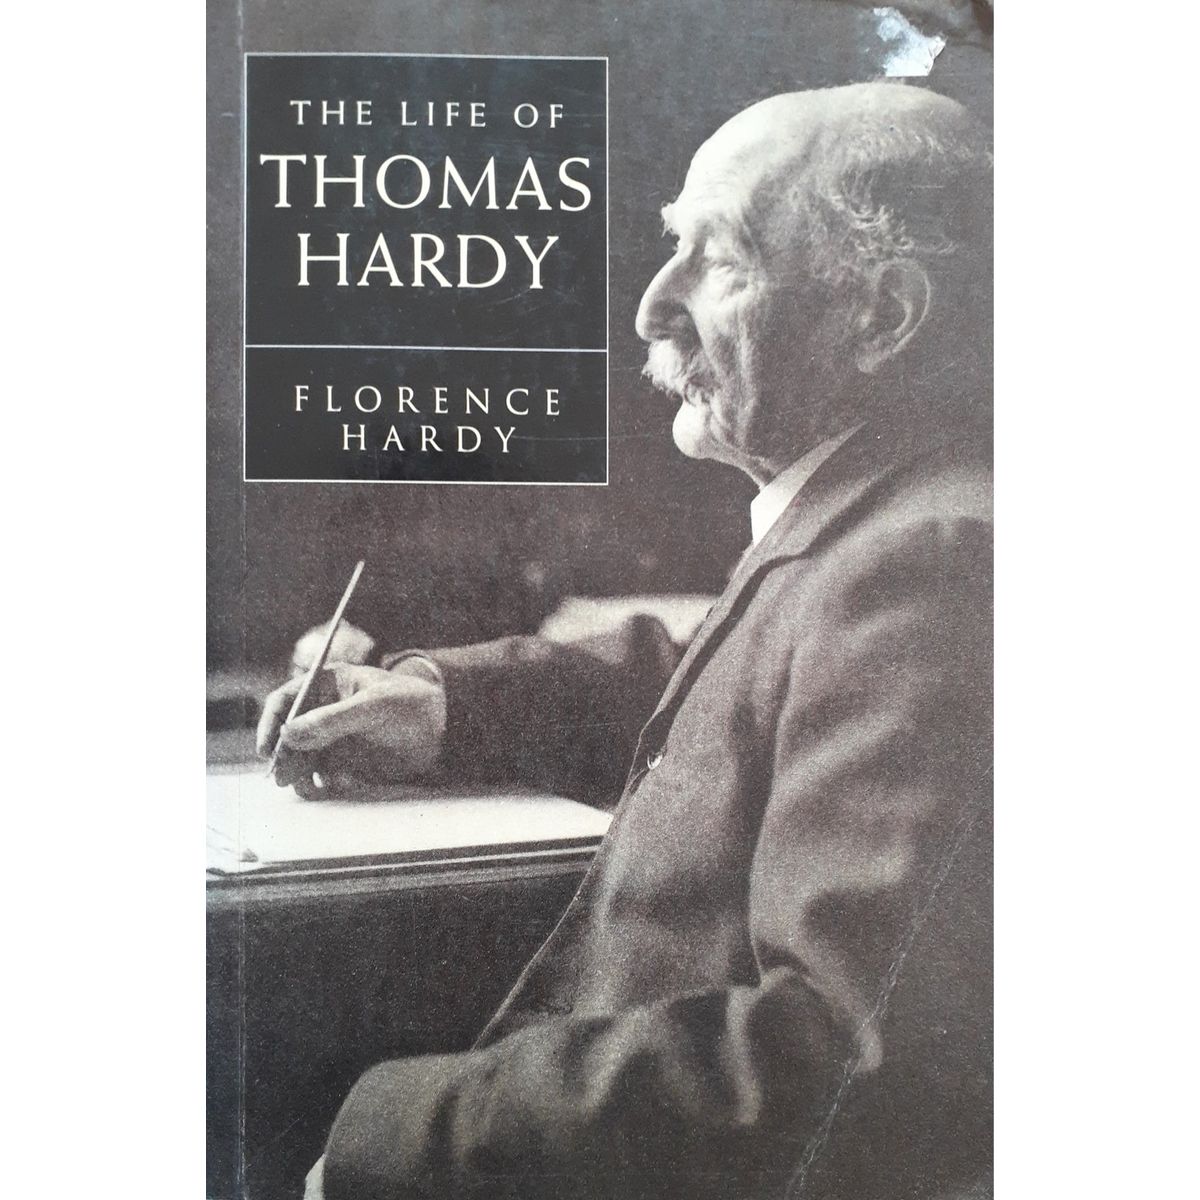 ISBN: 9781858911229 / 1858911222 - The Life of Thomas Hardy by Florence Hardy [1994]